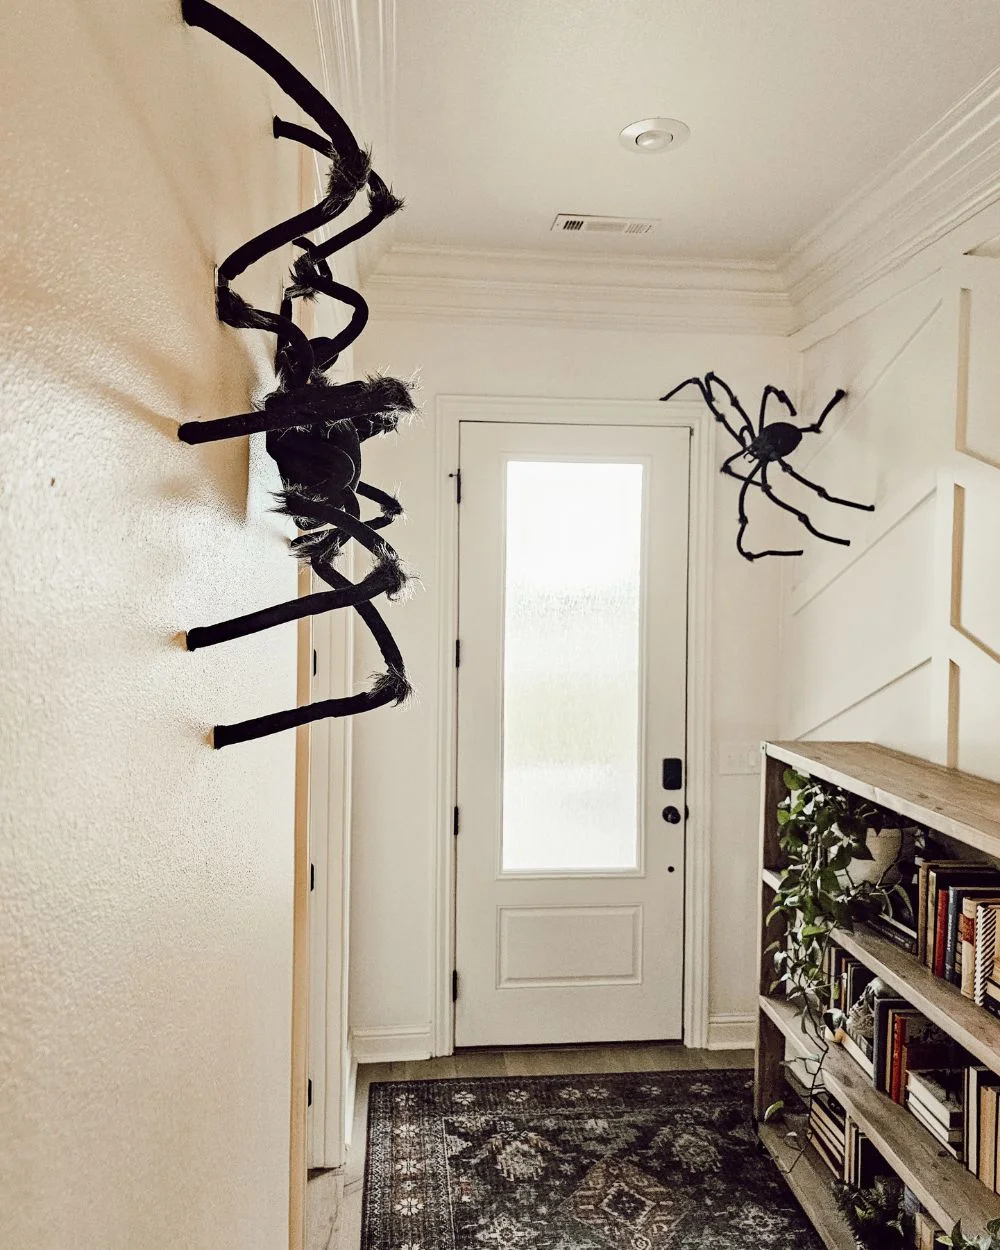 inside the entryway, two out of the three huge spiders climbing on the walls